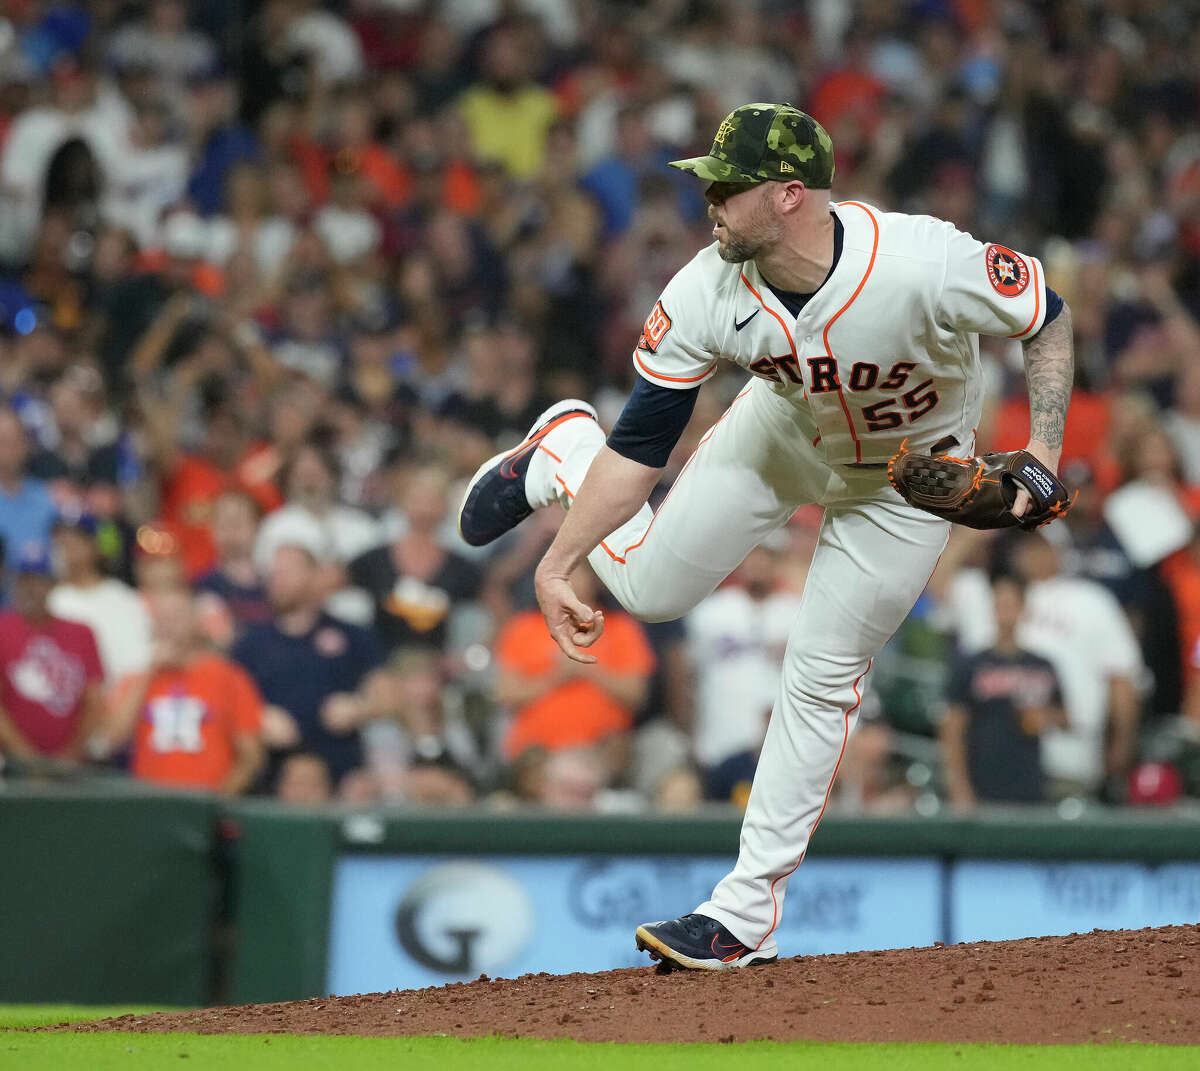 Houston Astros relief pitcher Ryan Pressly (55) strikes out Texas Rangers Sam Huff (55) to end the ninth inning of an MLB game at Minute Maid Park on Saturday, May 21, 2022 in Houston. Astros won 2-1.